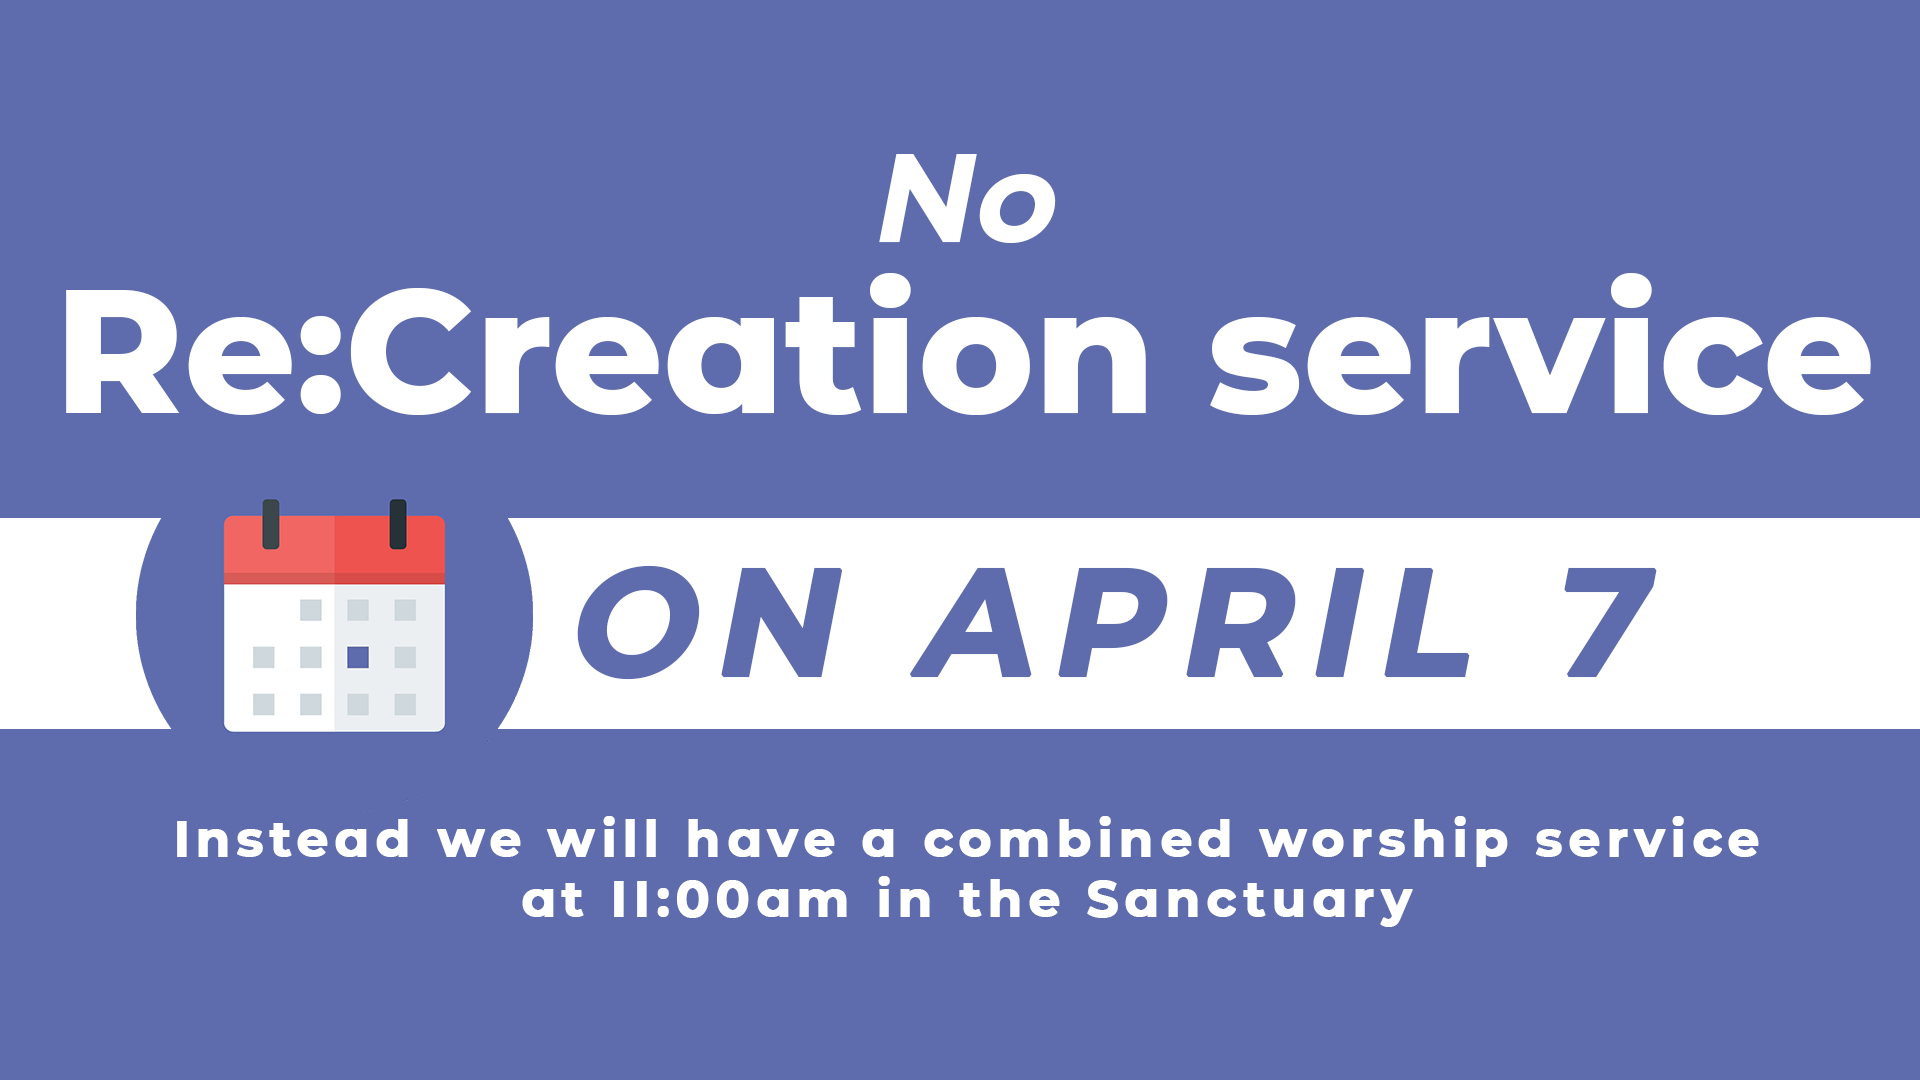 No Re:Creation service on April 7. Instead we will have a combined worship service at 11:00am in the Sanctuary.